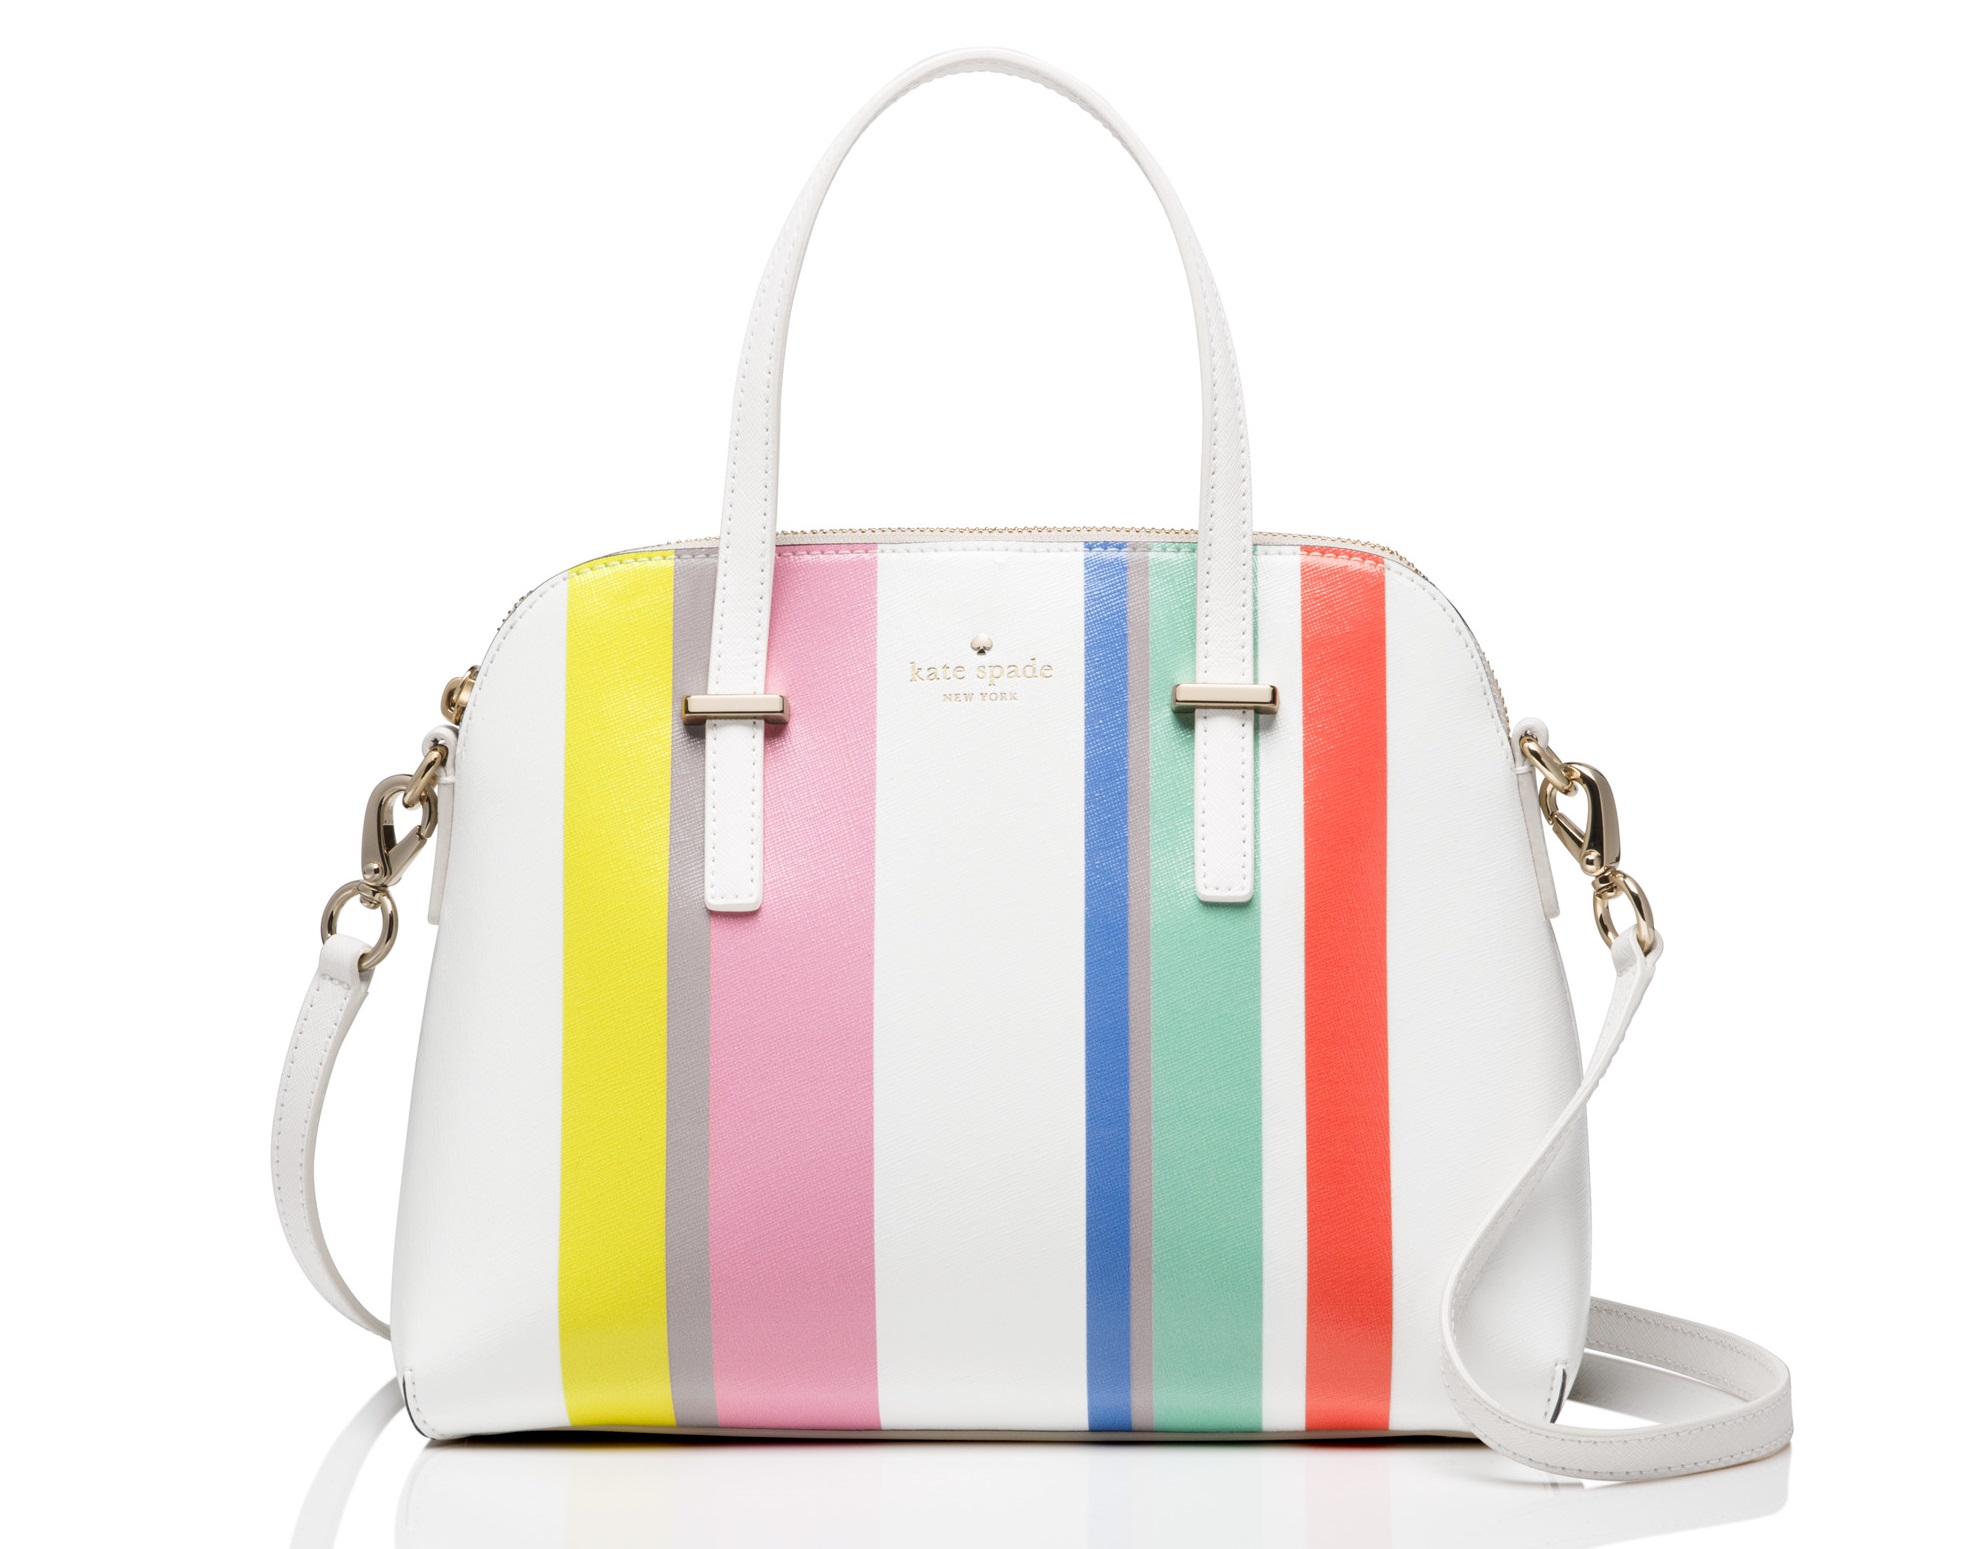 Kate Spade - Increase Traffic to Your Online Store